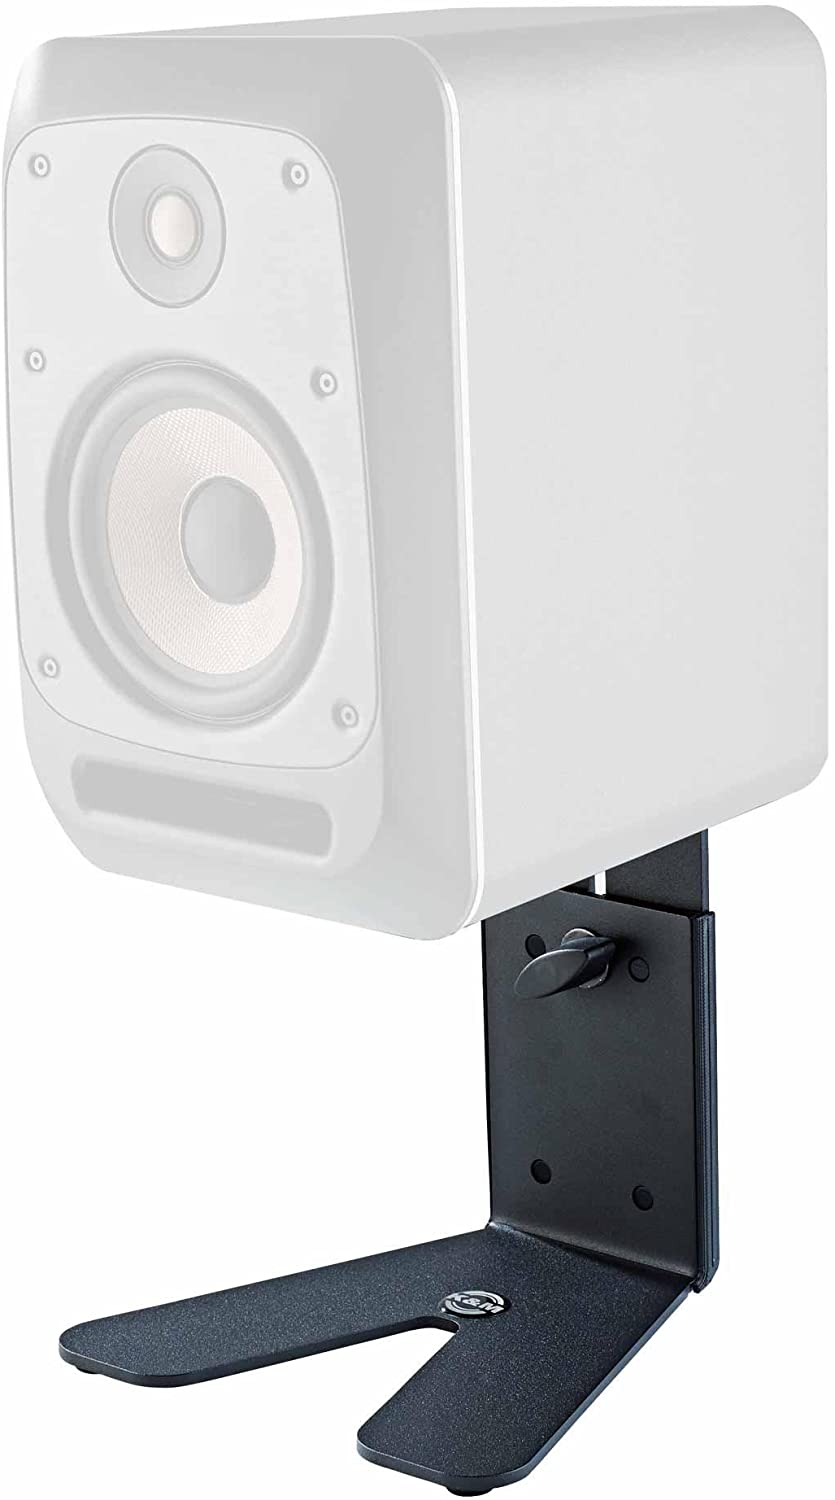 picture showing KM speaker stand with speaker on top on white background